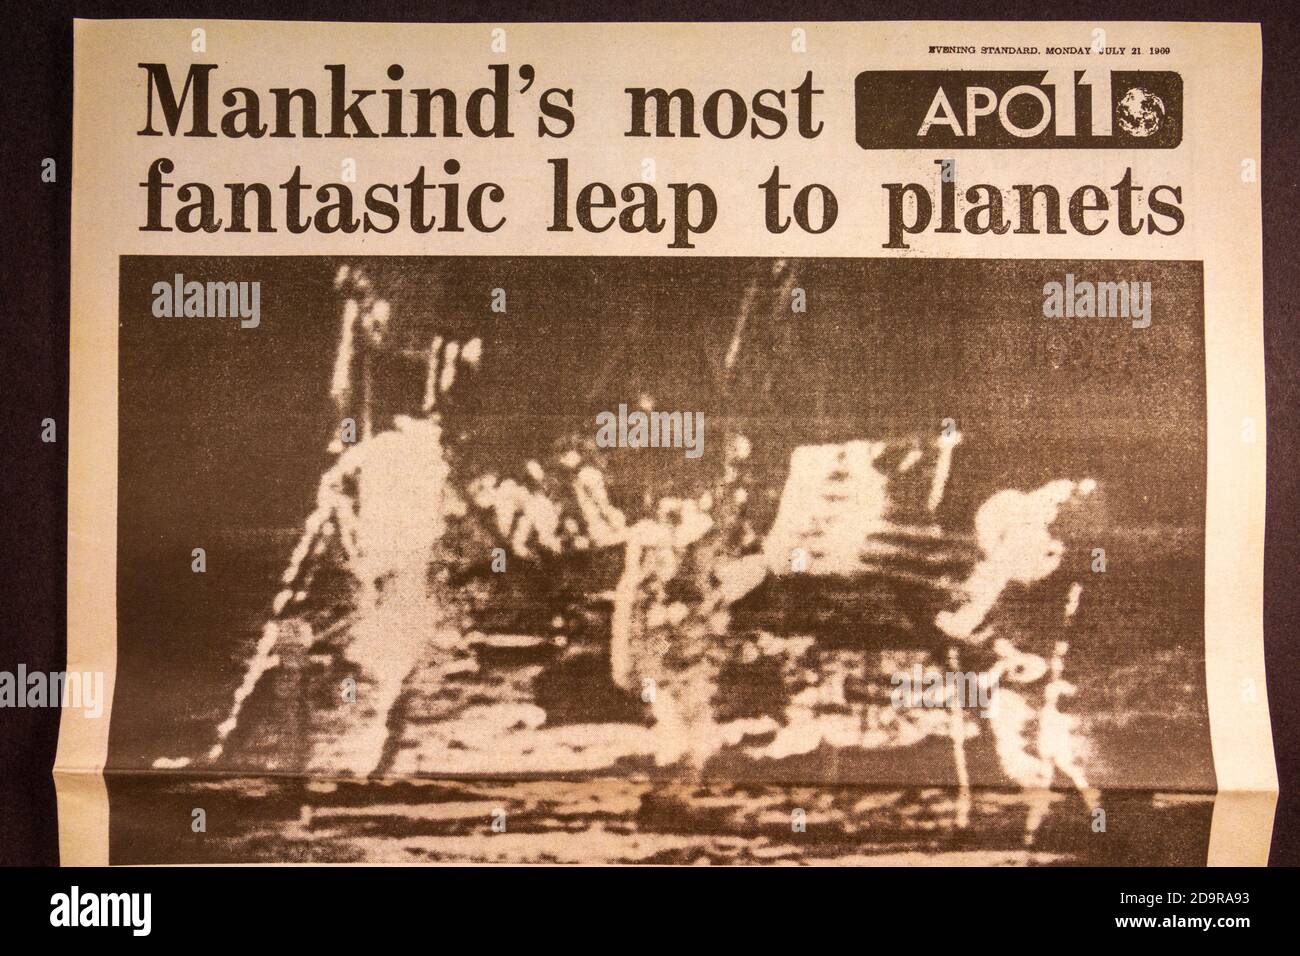 Moon photo inside an Evening Standard souvenir newspaper (replica) for the Apollo 11 Moon landings on 21st July 1969. Stock Photo